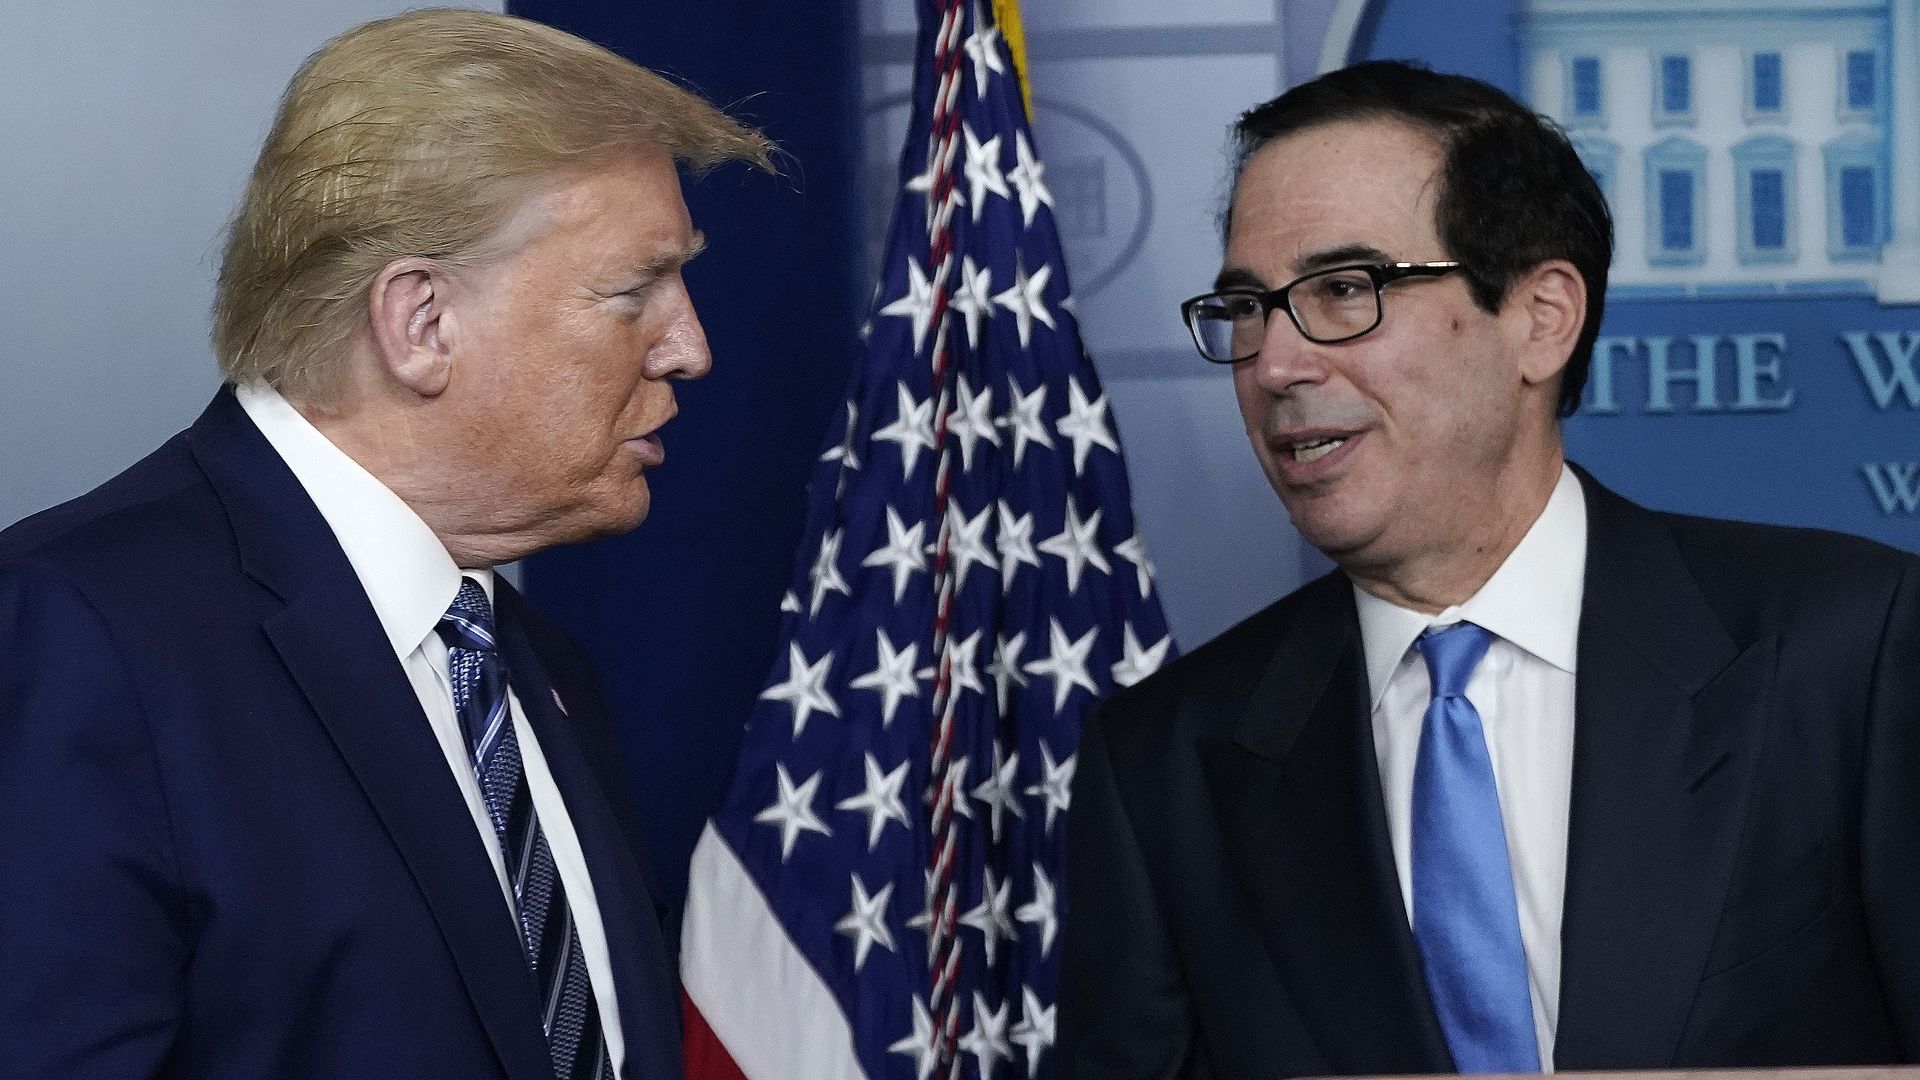 Trump and Treasury Secretary Steven Mnuchin participate in the daily coronavirus task force briefing at the White House on April 21, 2020 in Washington, DC